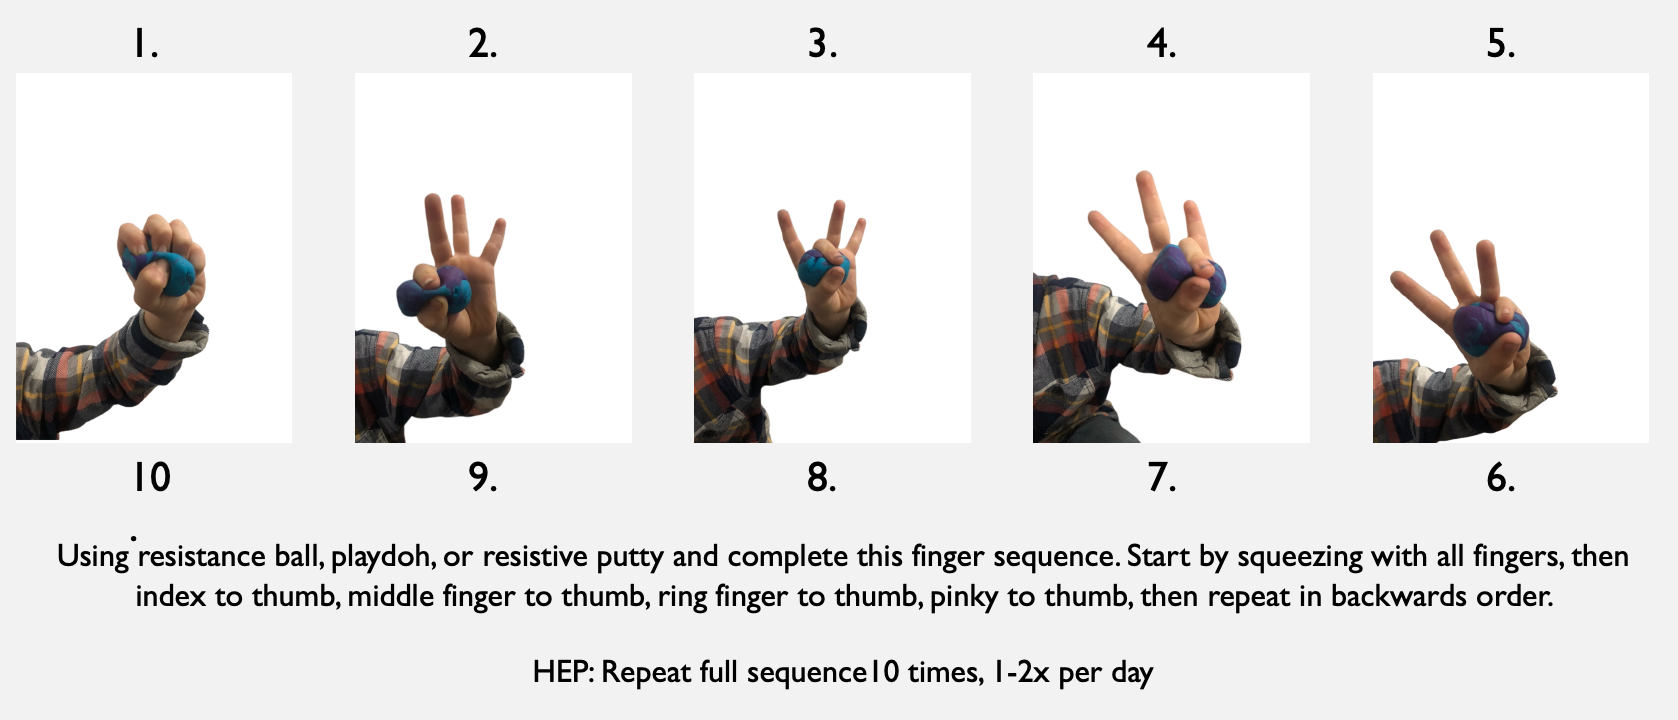 Five different pictures showing the different hand movements to use with exercises for the palmar grasp reflex